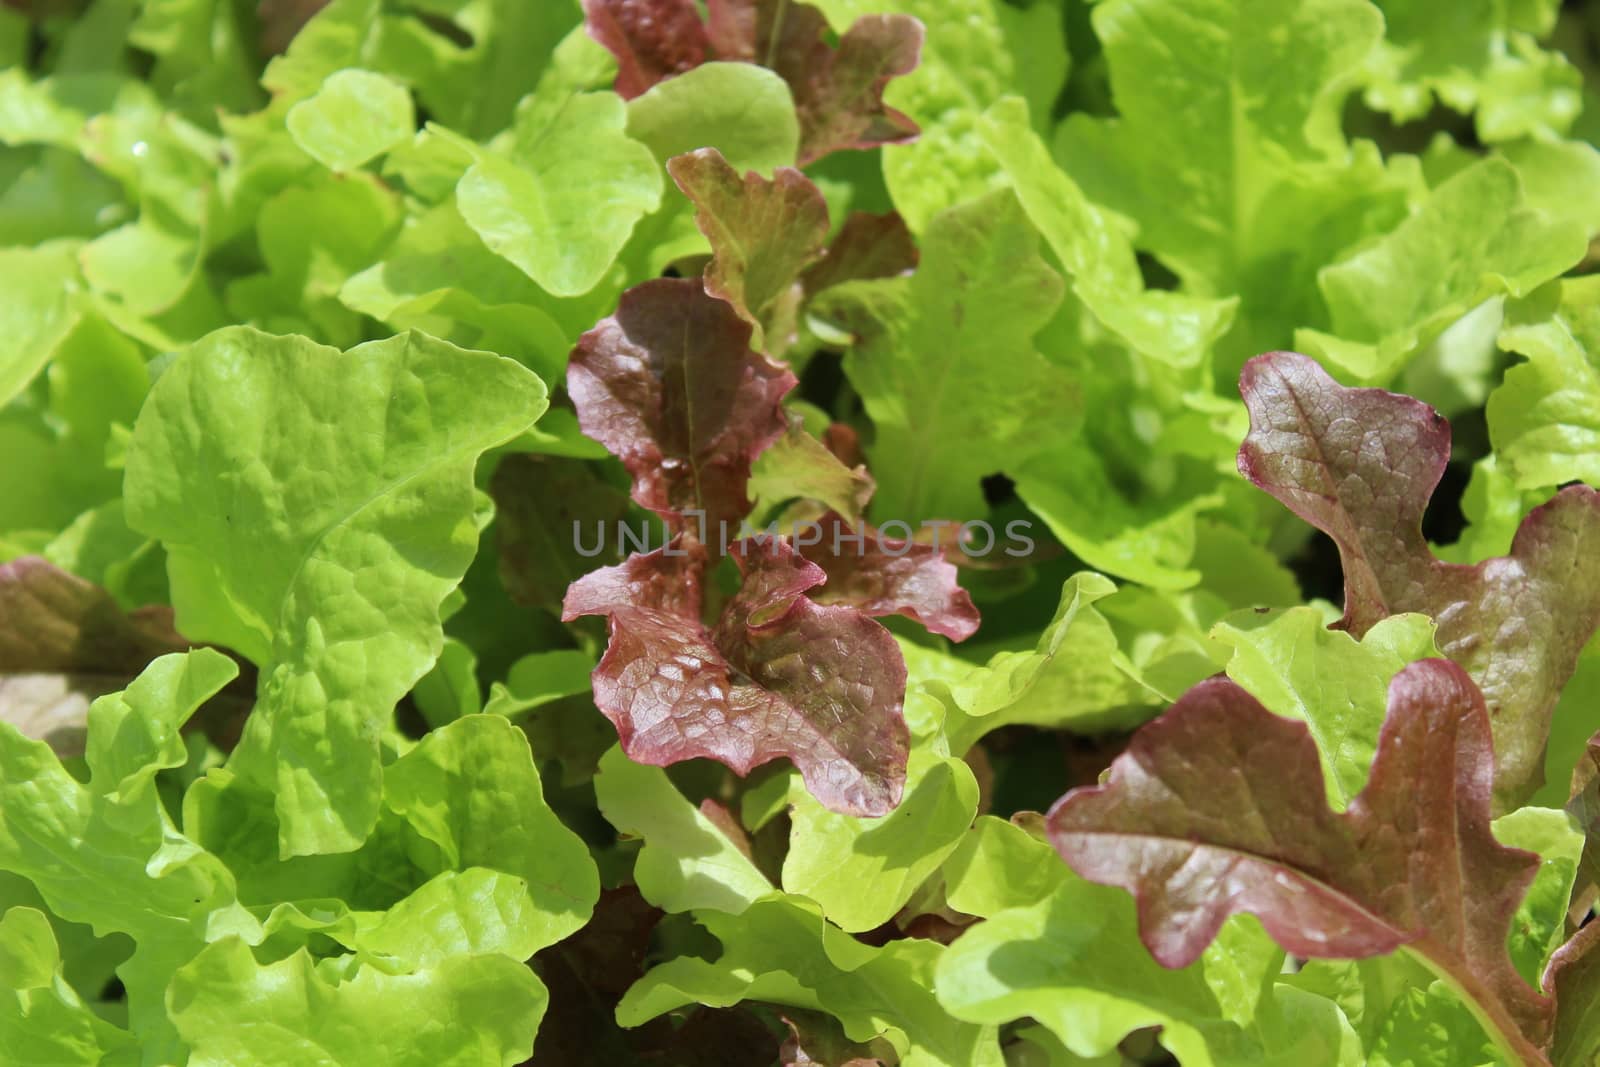 The picture shows fresh green salad in the garden